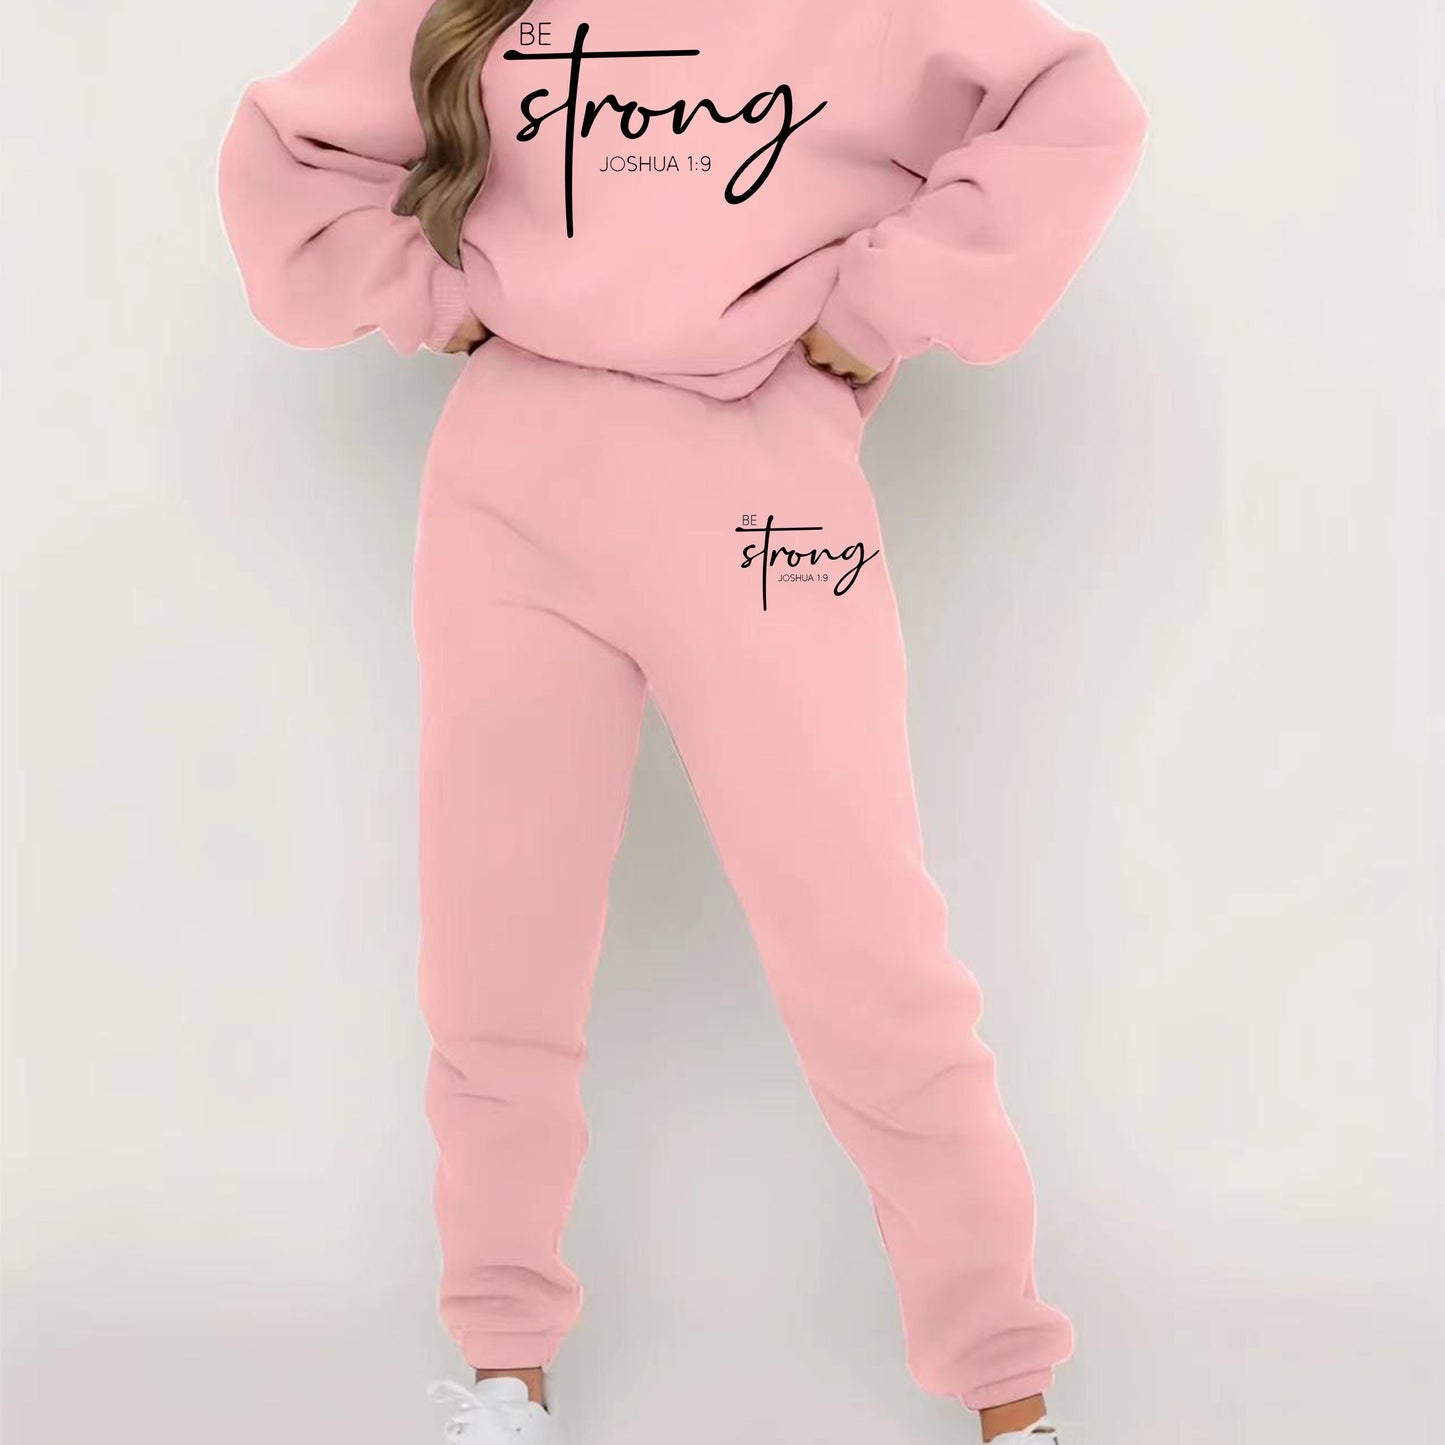 Joshua 1:9 Be Strong Women's Christian Casual Outfit claimedbygoddesigns